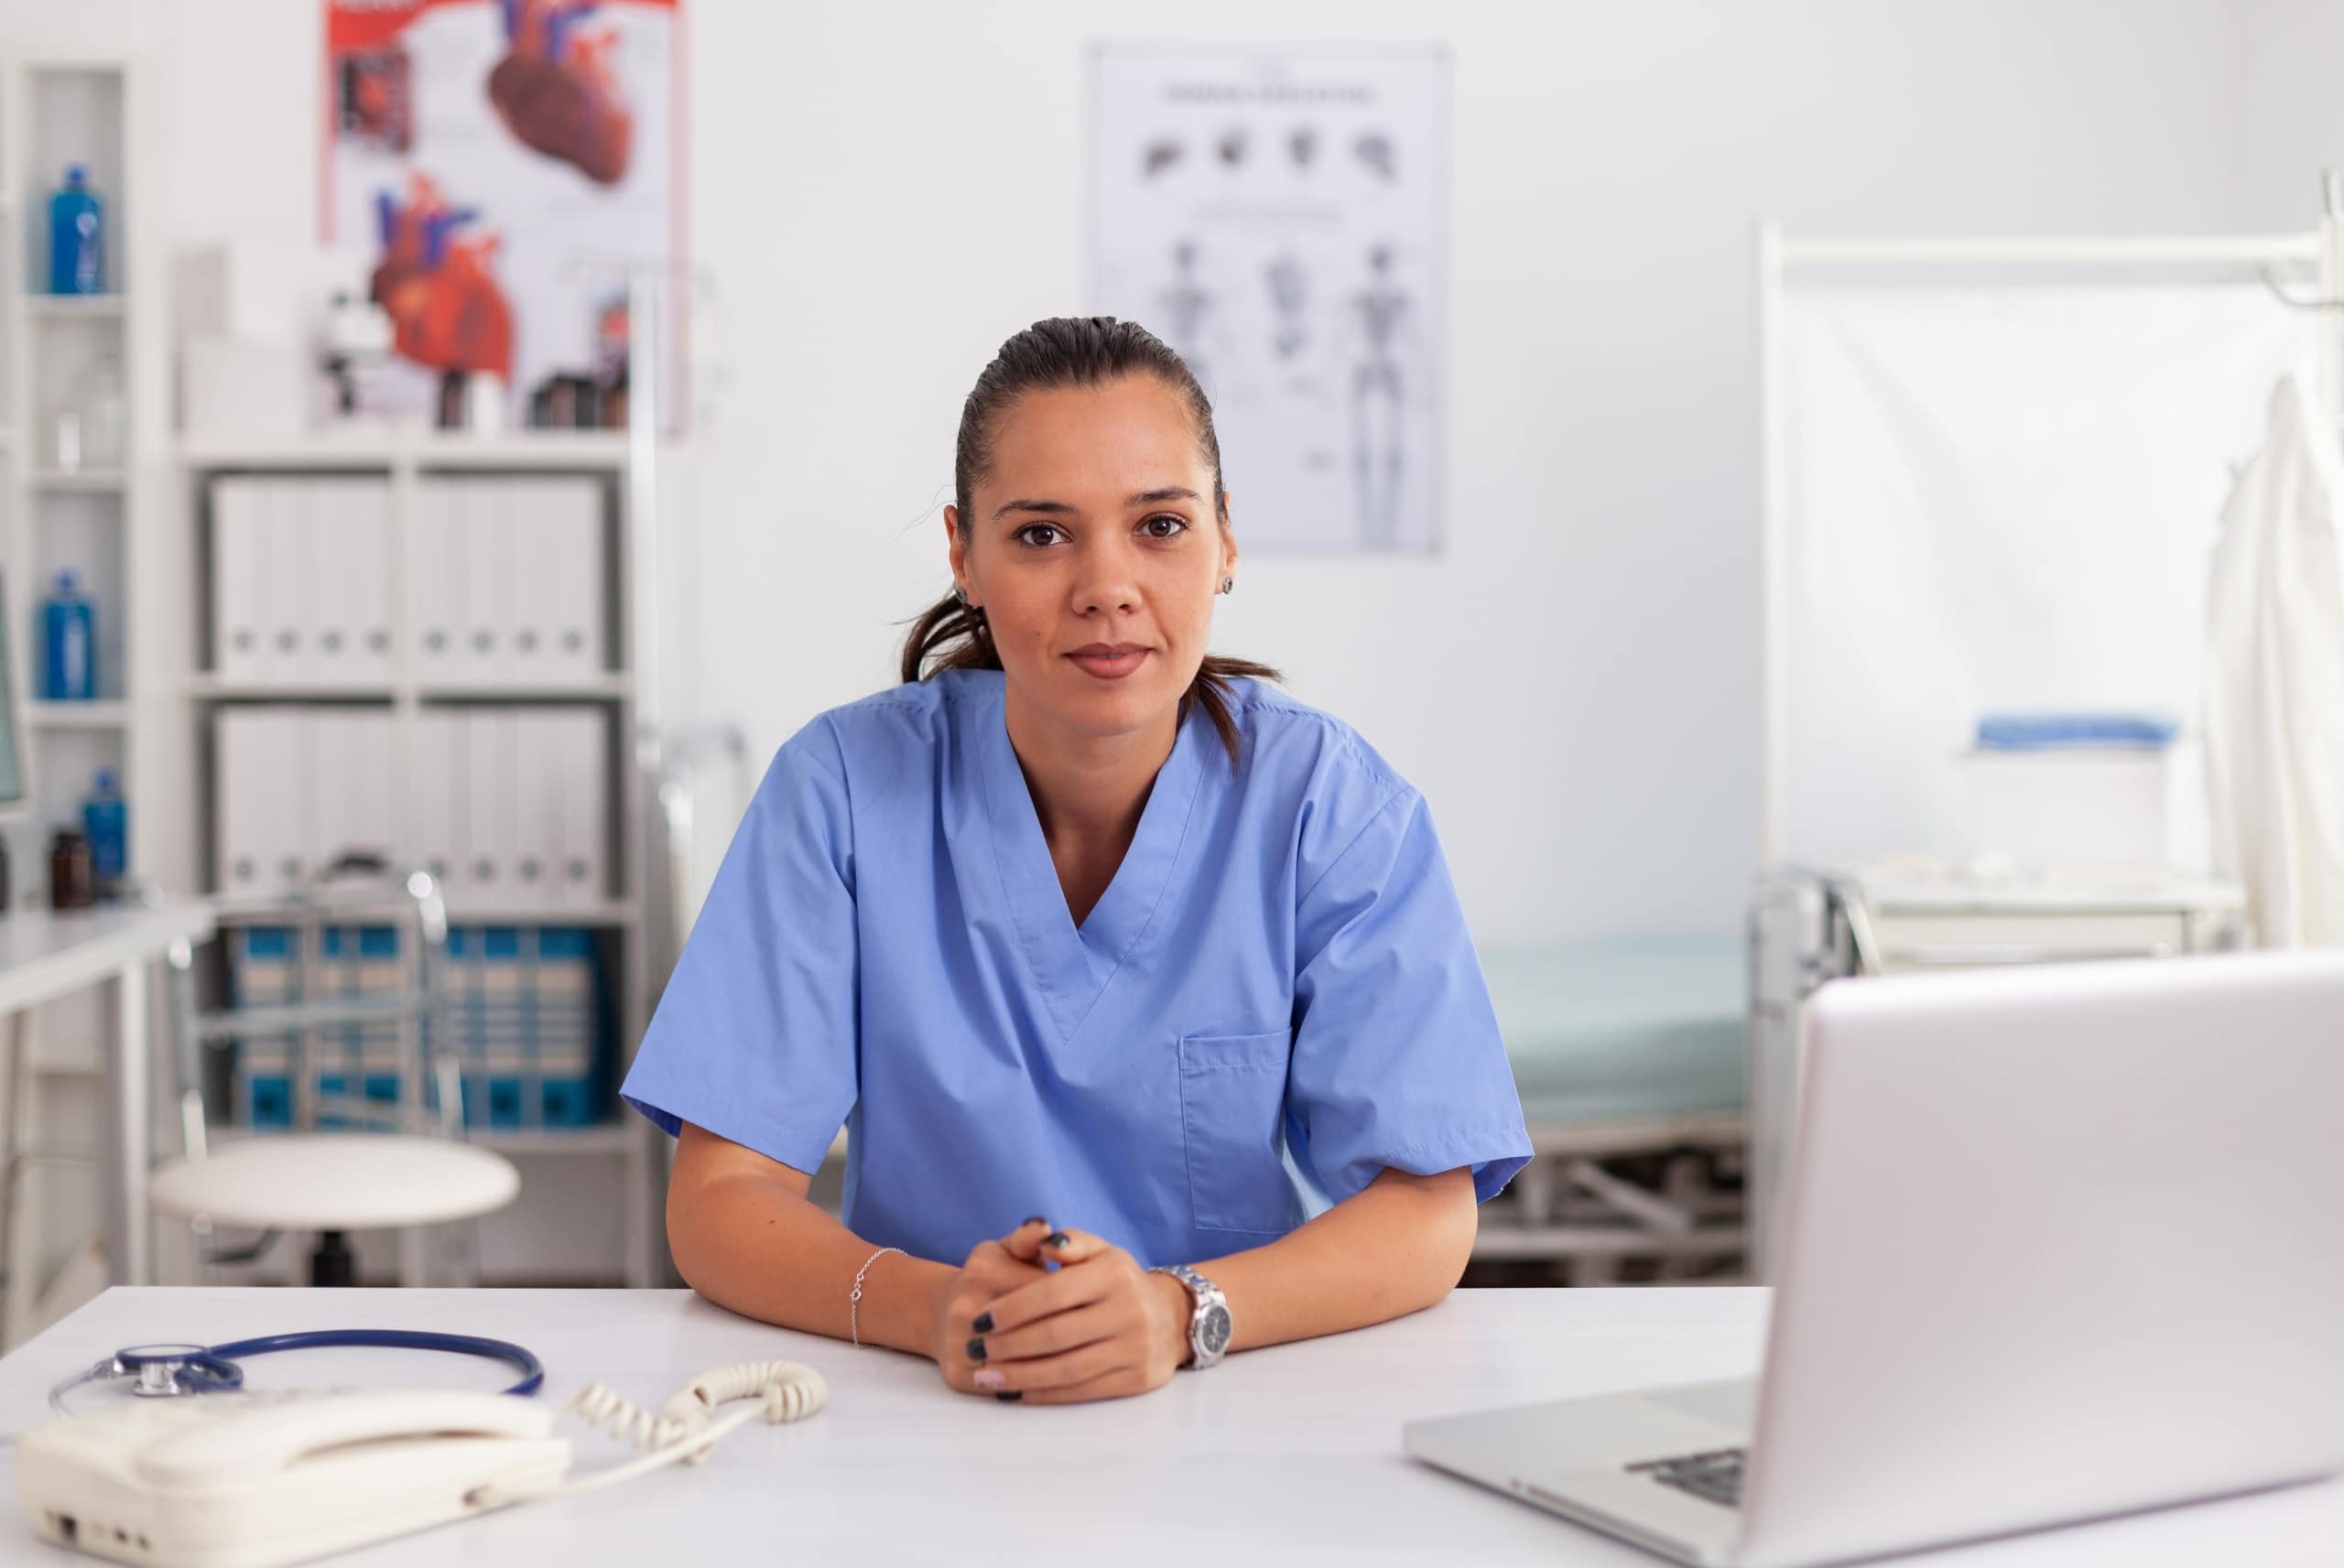 Serious female medical professional at a desk